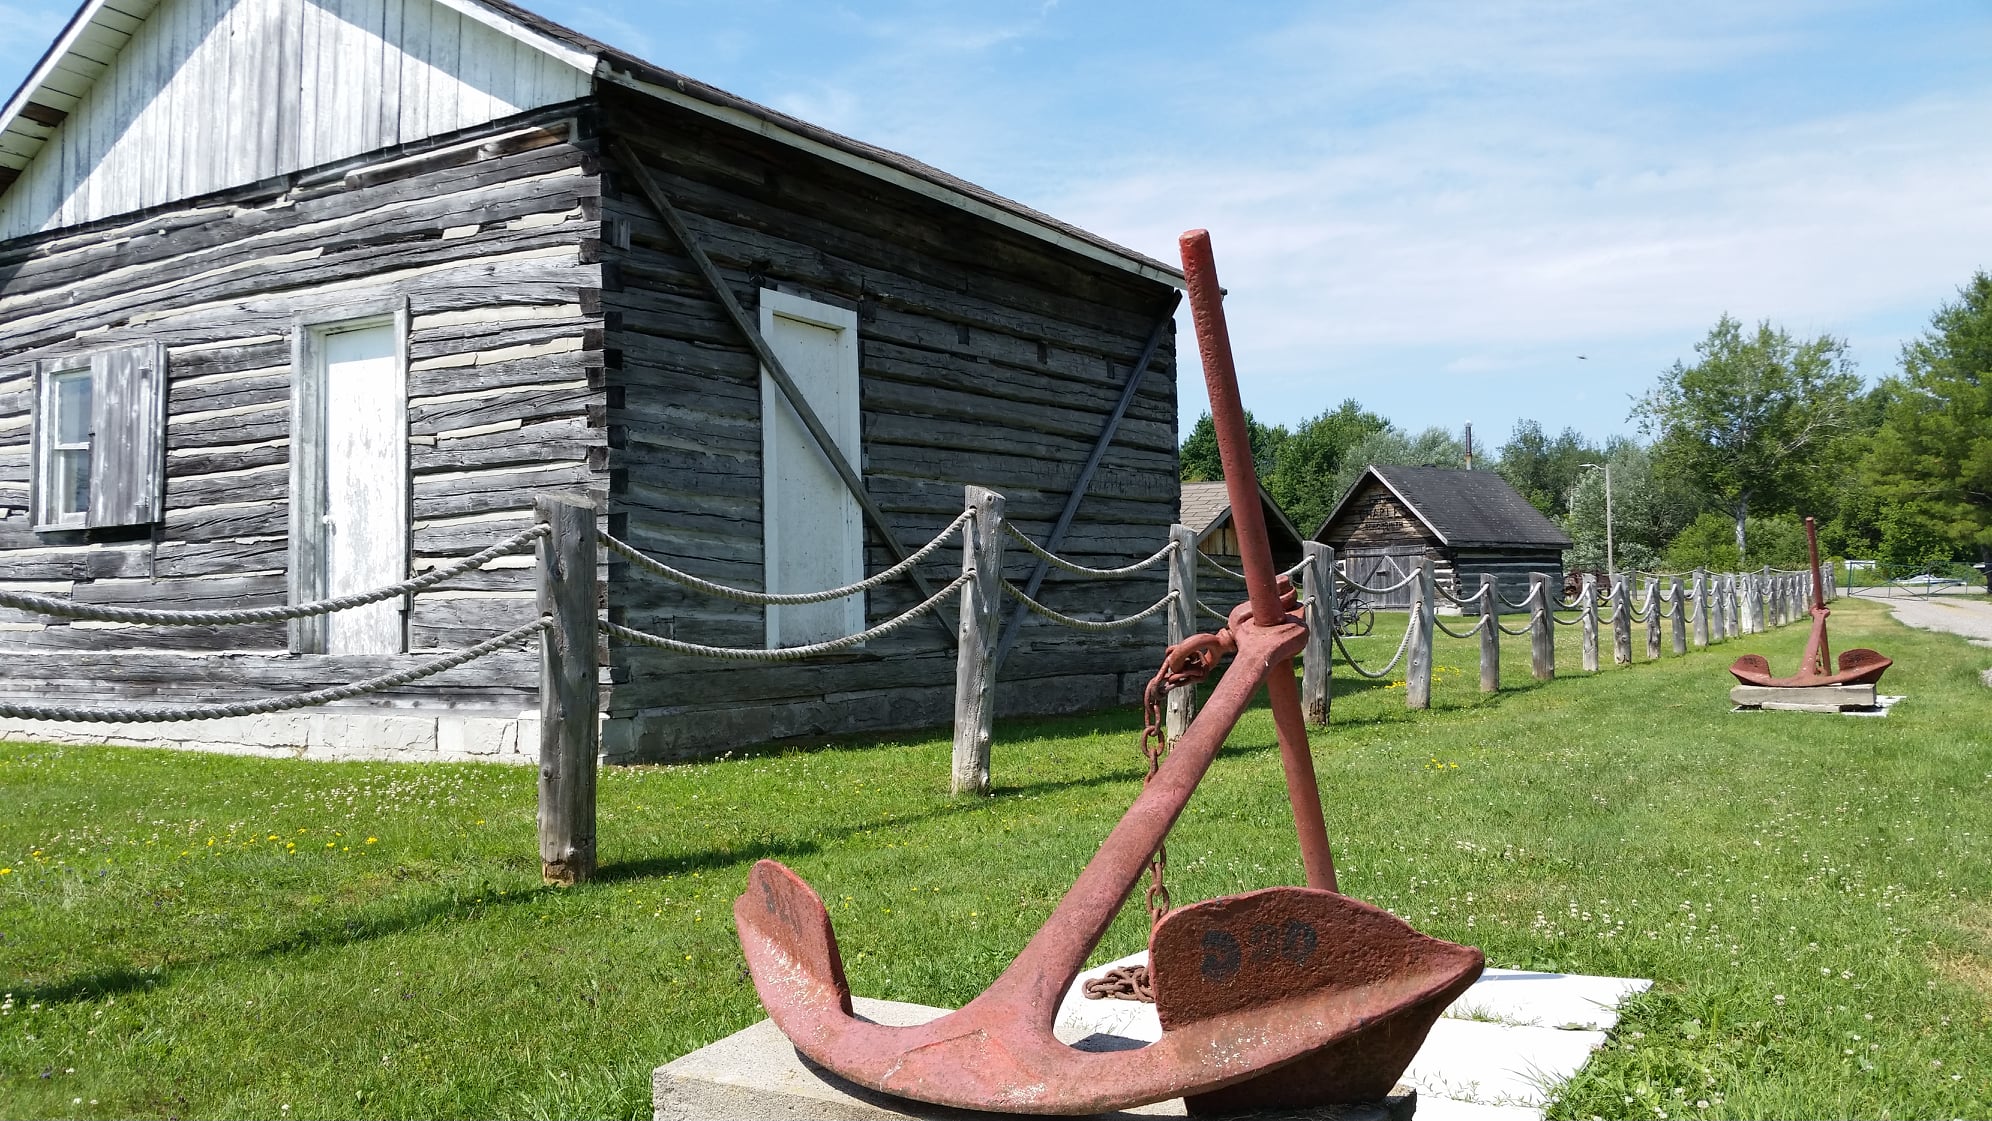 Sturgeon River House Museum; a log building surrounded by a wood and chain fence and green grass and trees, with a display of old, rusted metal tools in the foreground.